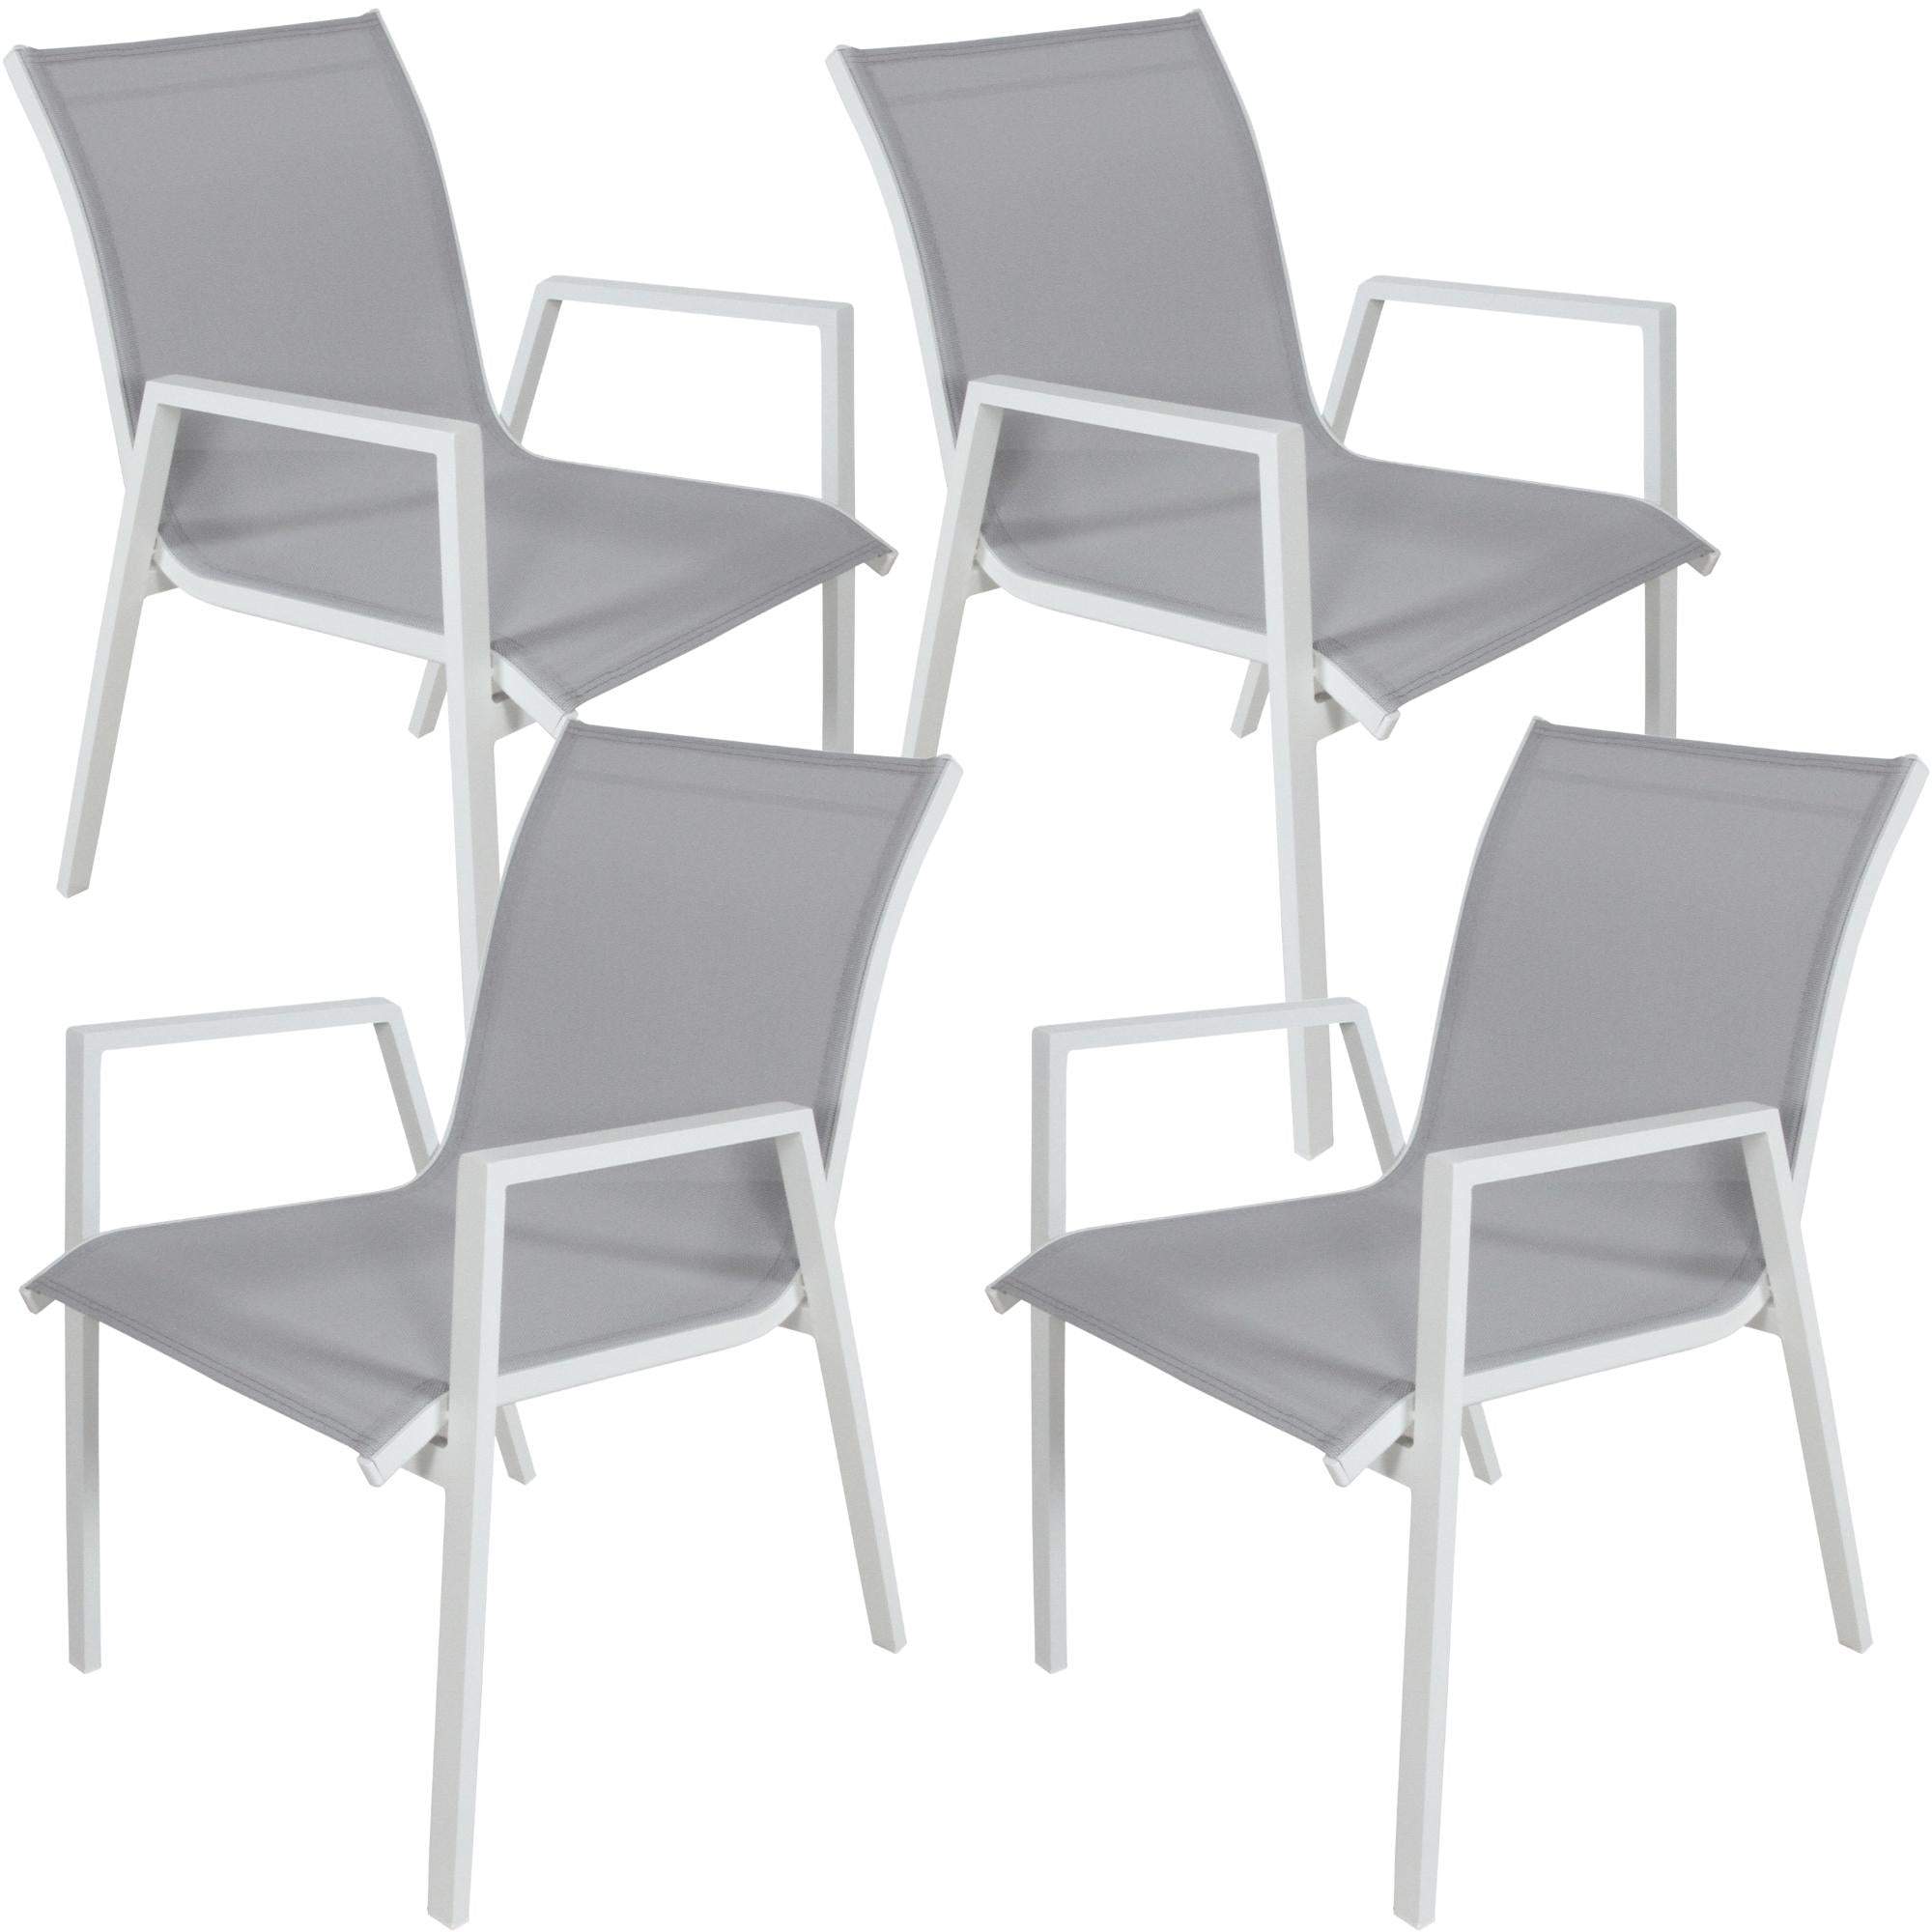 4pc Aluminium Stackable Outdoor Dining Chairs - White